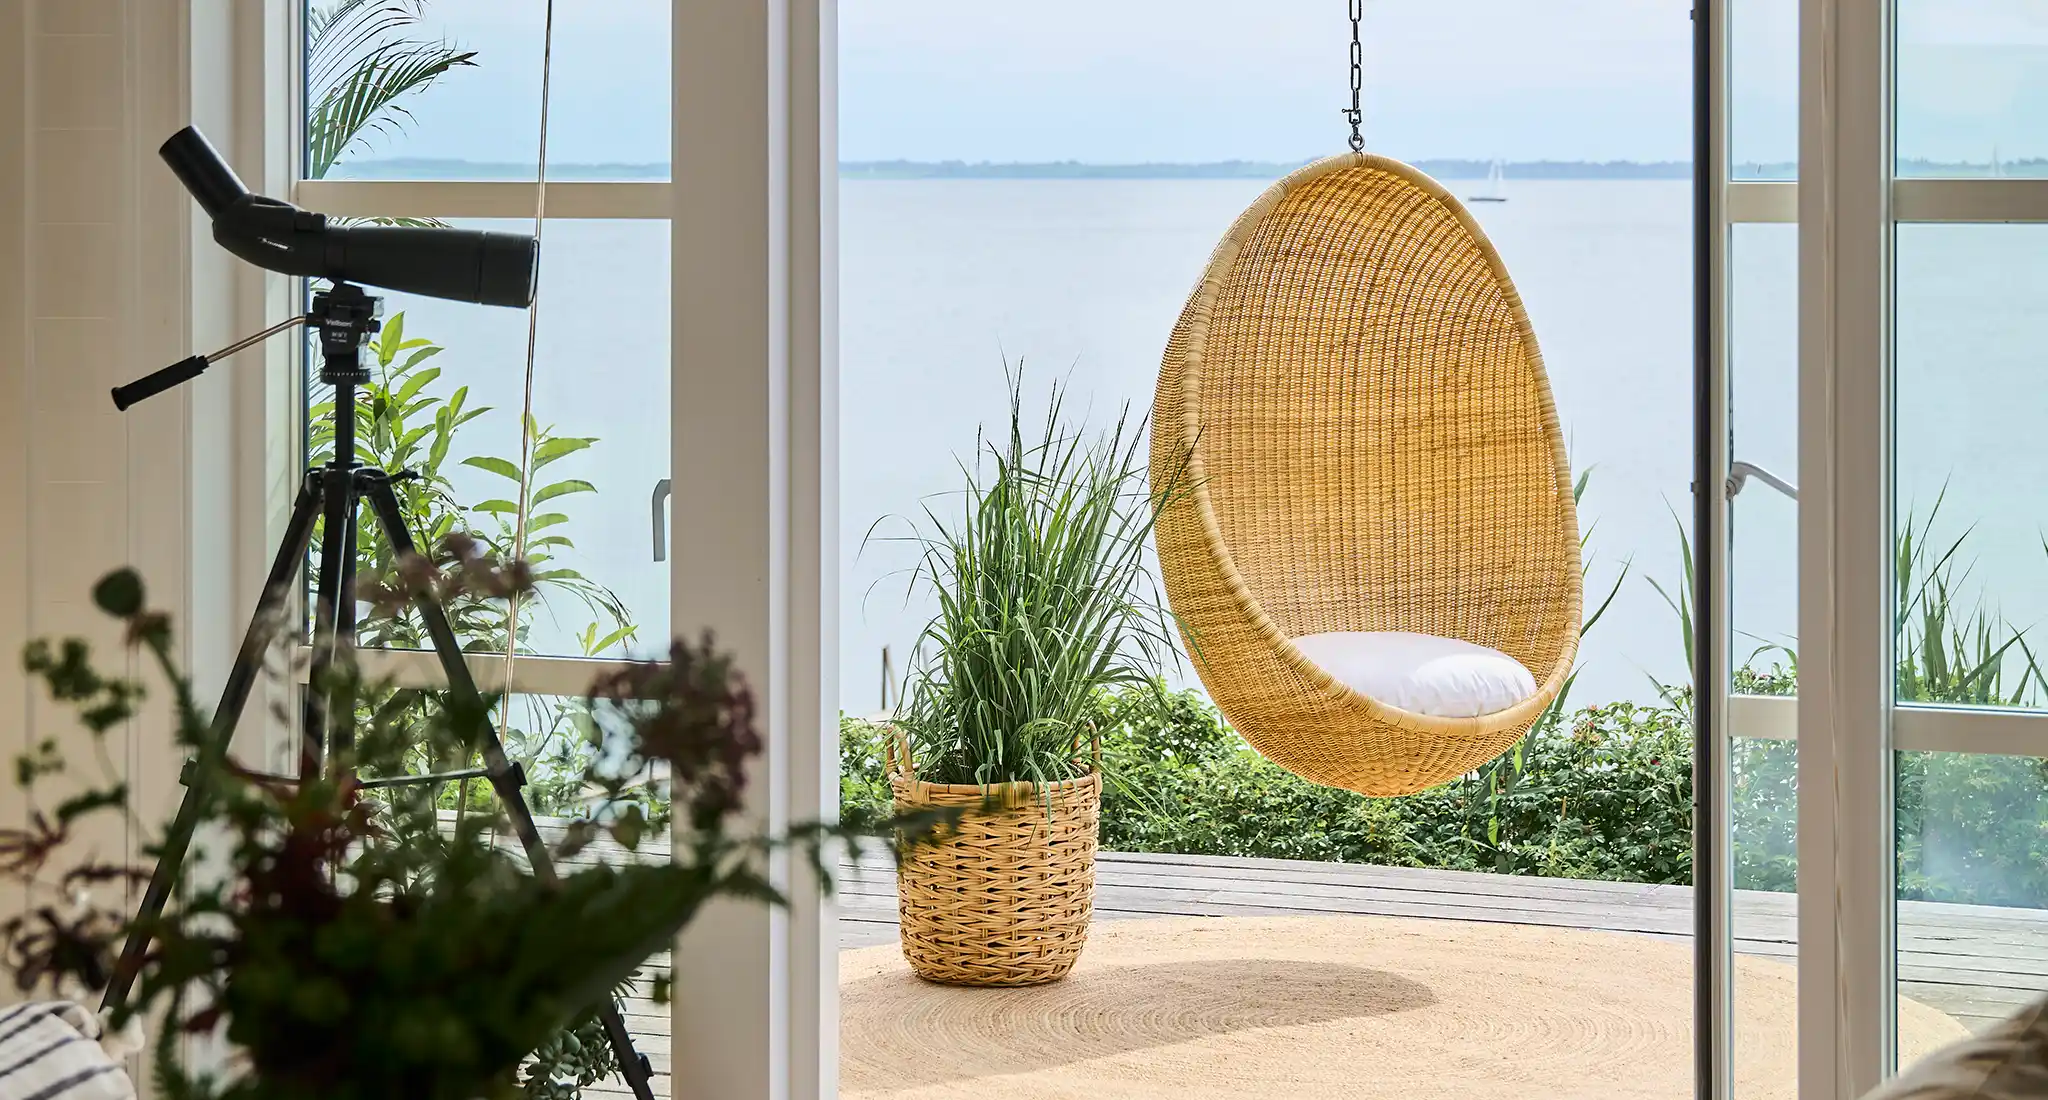 a hanging chair suspended in front of a window with a view of the water, part of an outdoor furniture supply project for a residential property in hong kong.